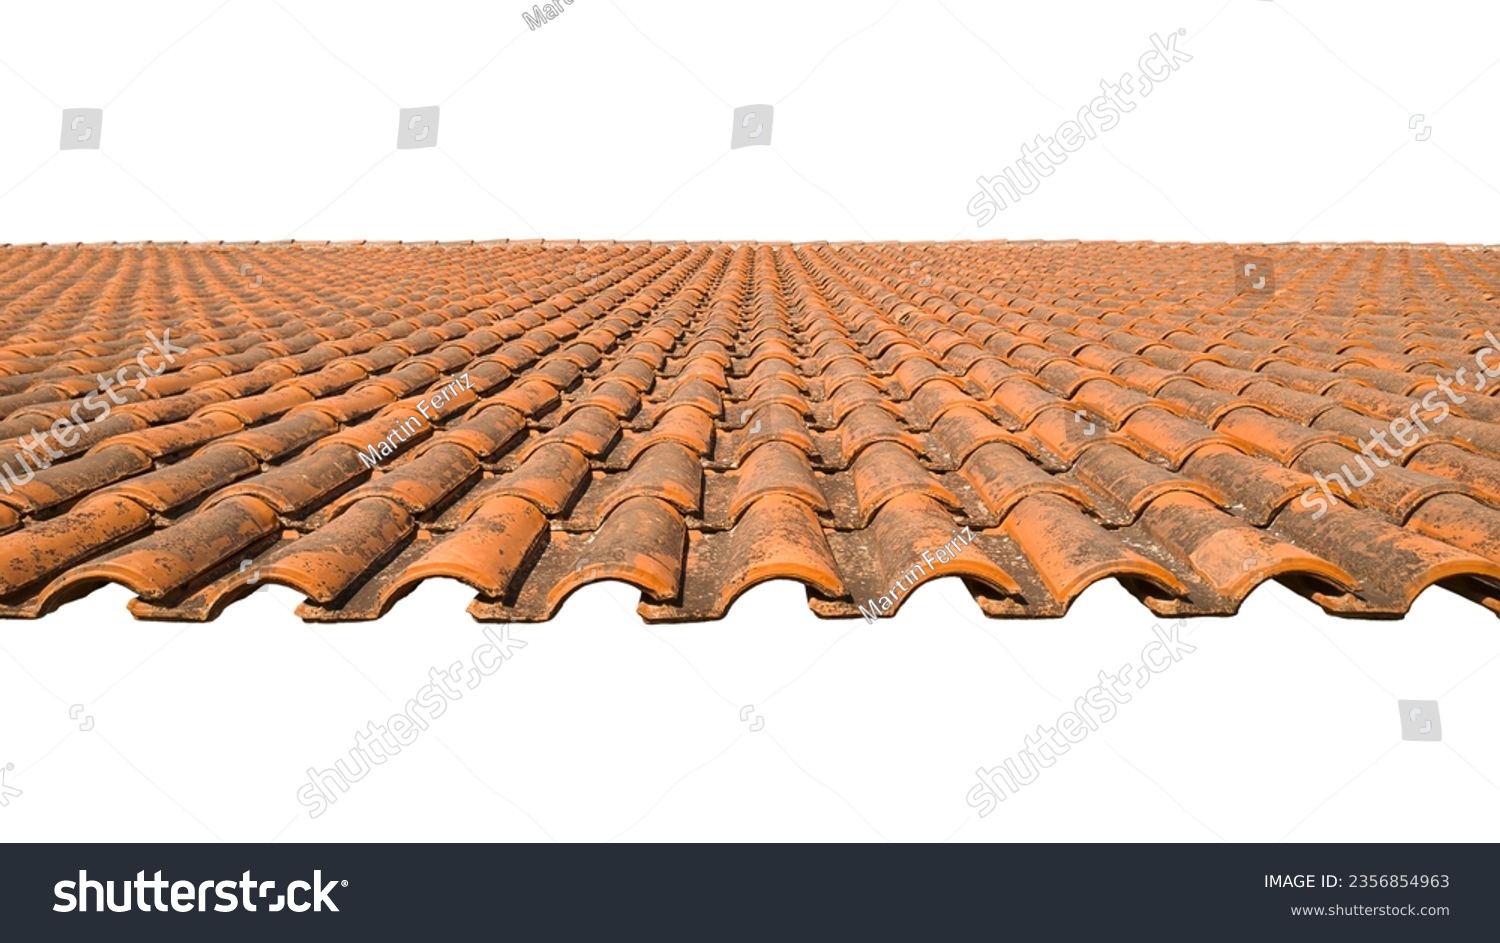 Weathered red tile roof with midday overhead sunlight, isolated on empty background #2356854963